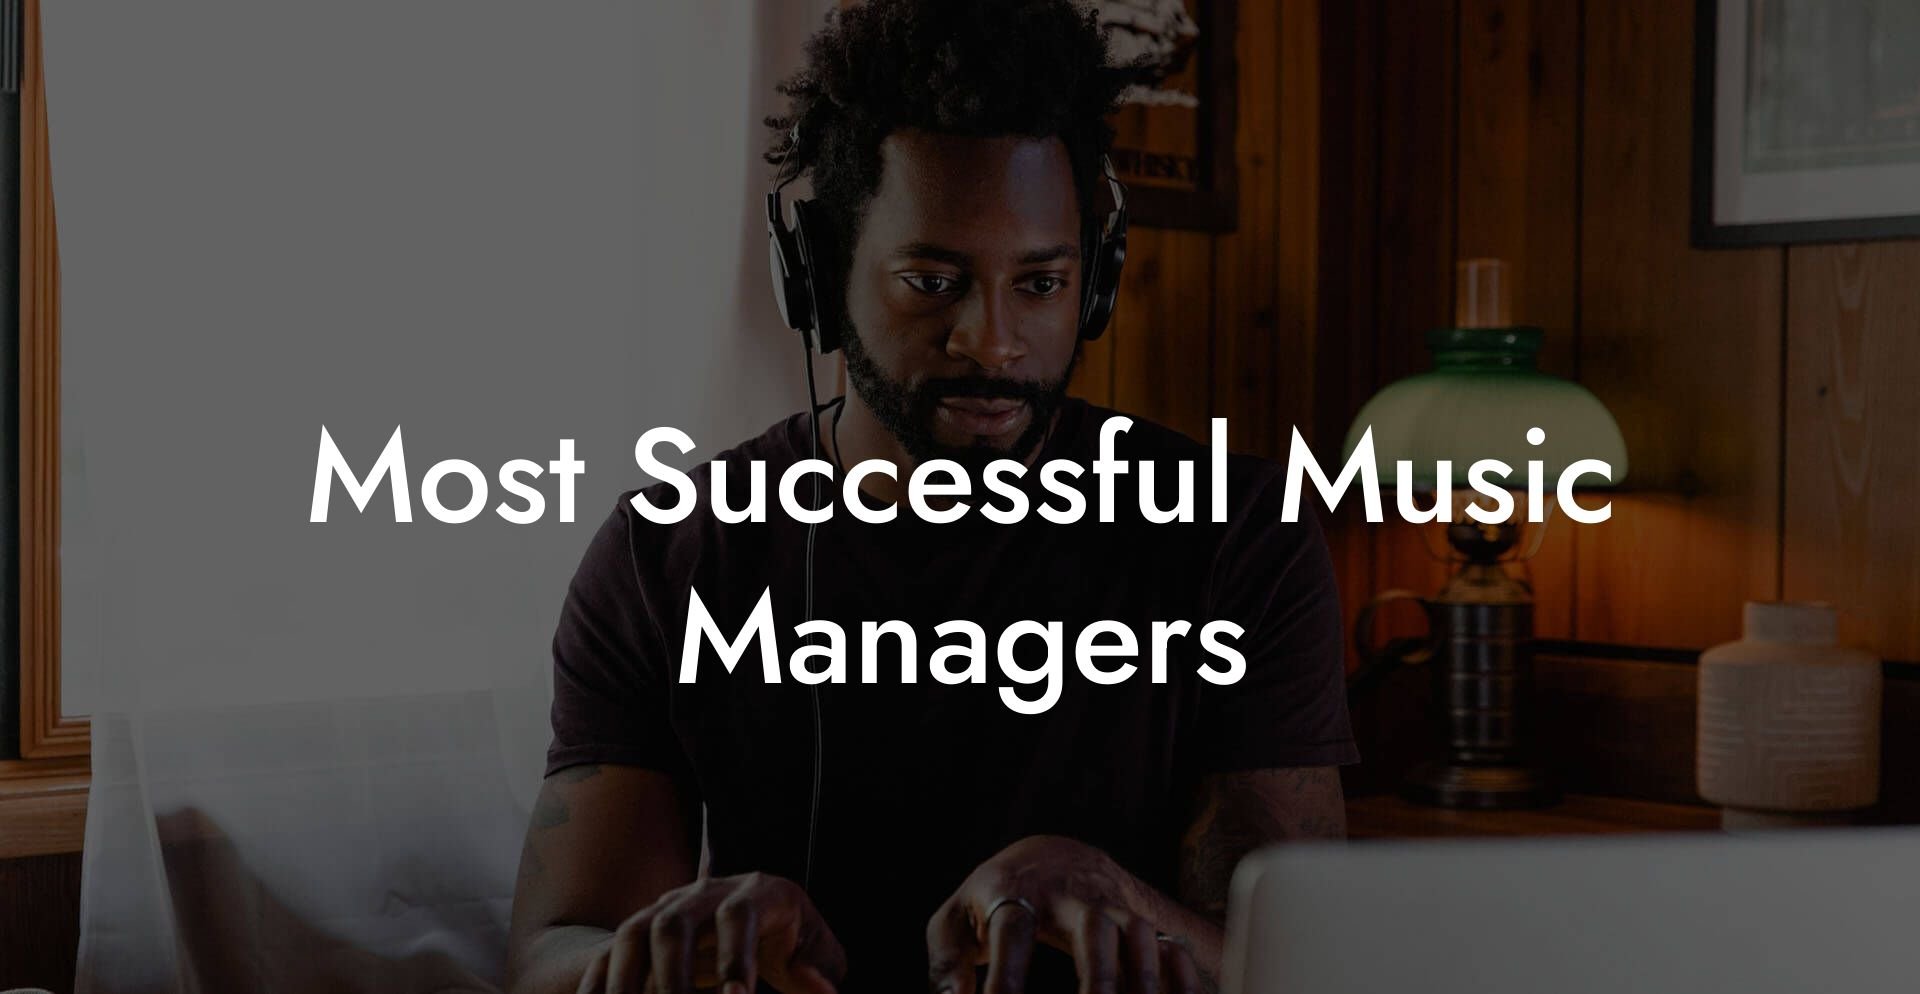 Most Successful Music Managers